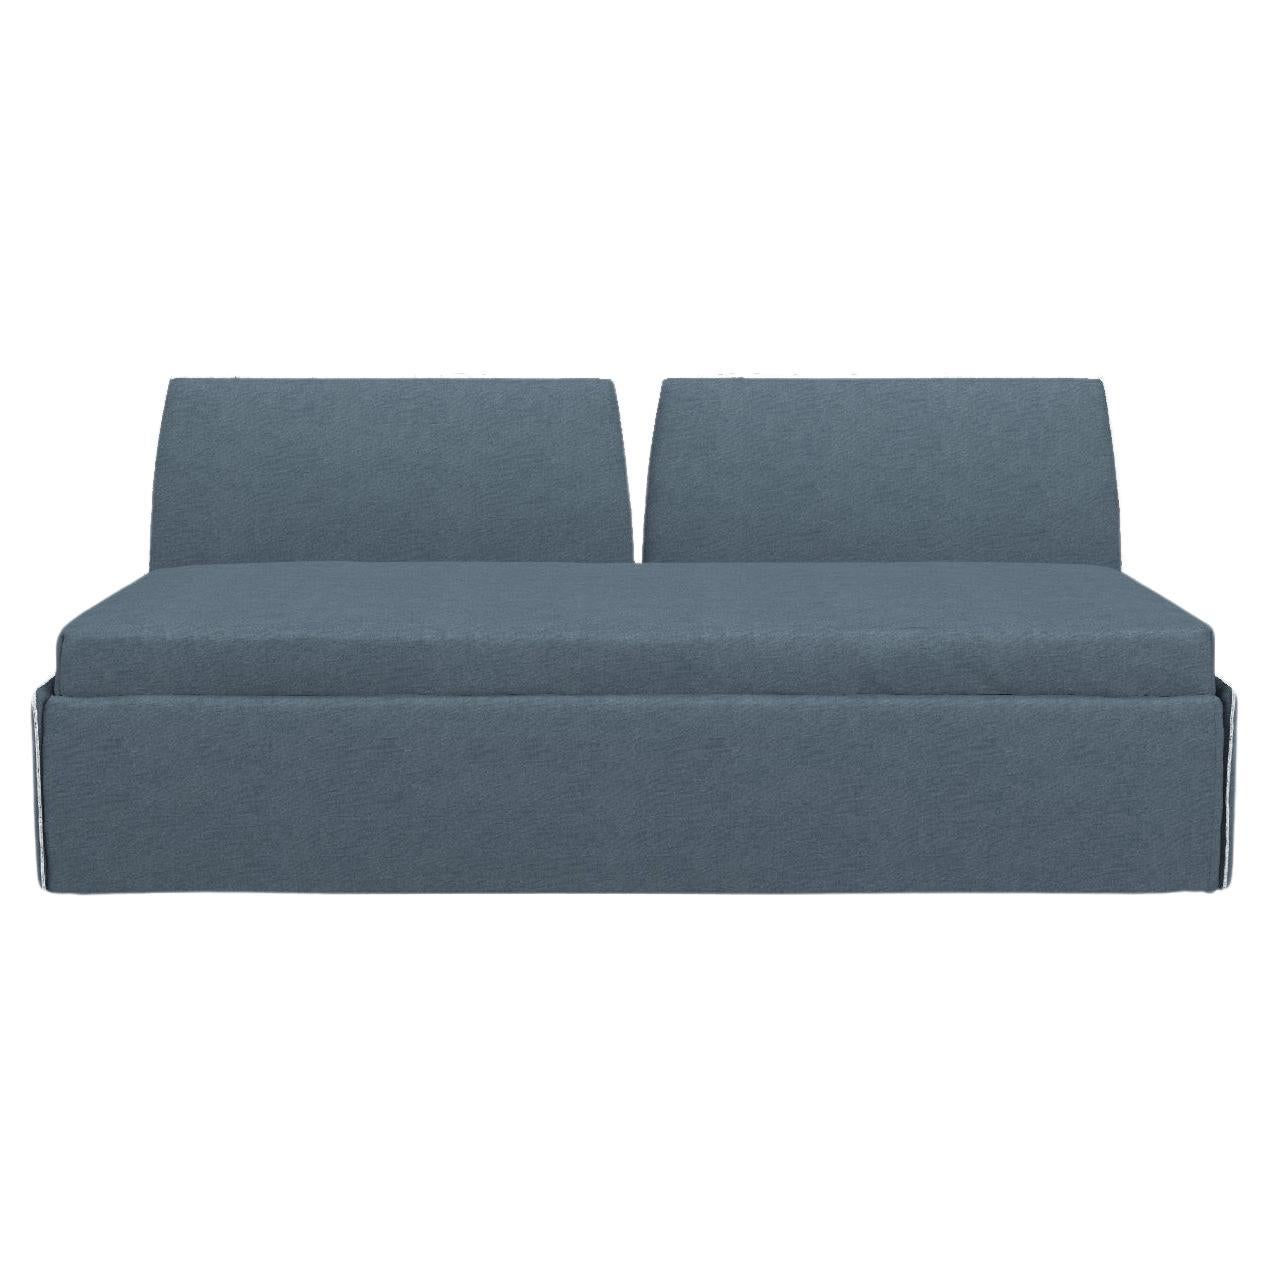 Gervasoni Open 5 Small Modular Bed Sofa in Munch Upholstery by Paola Navone For Sale